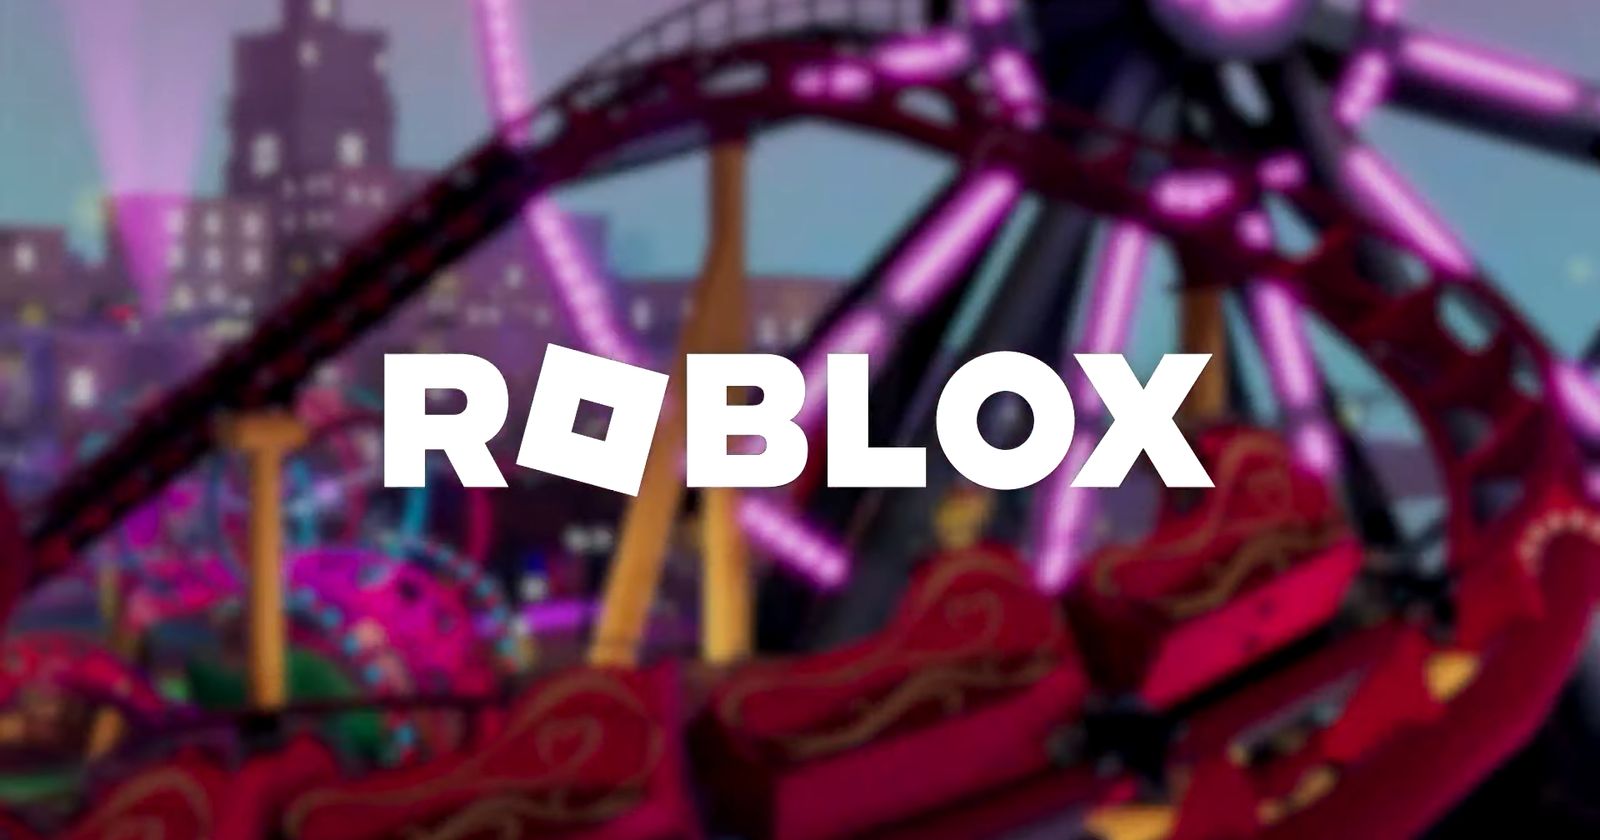 Roblox PlayStation 4/5 - Release date, features, more